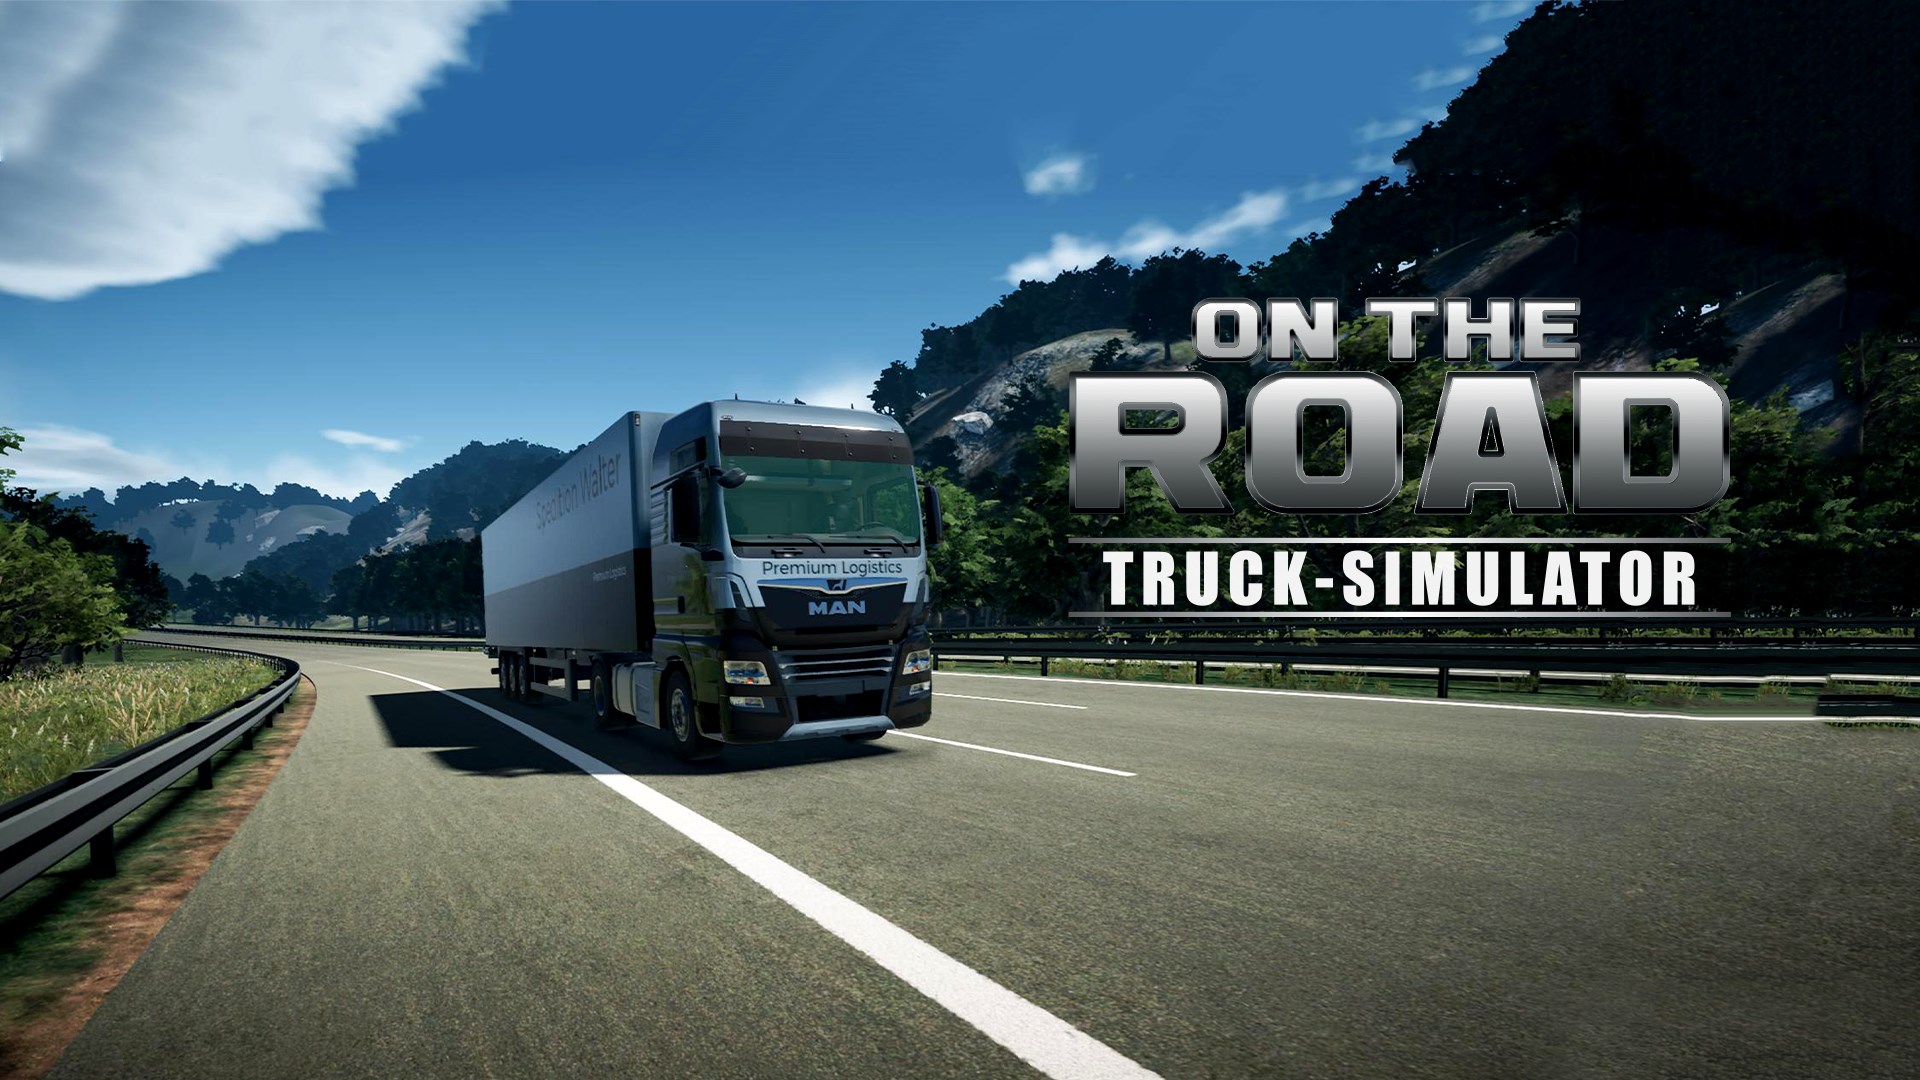 On The Road The Truck Simulator - Xbox One e Séries S/X + Brinde